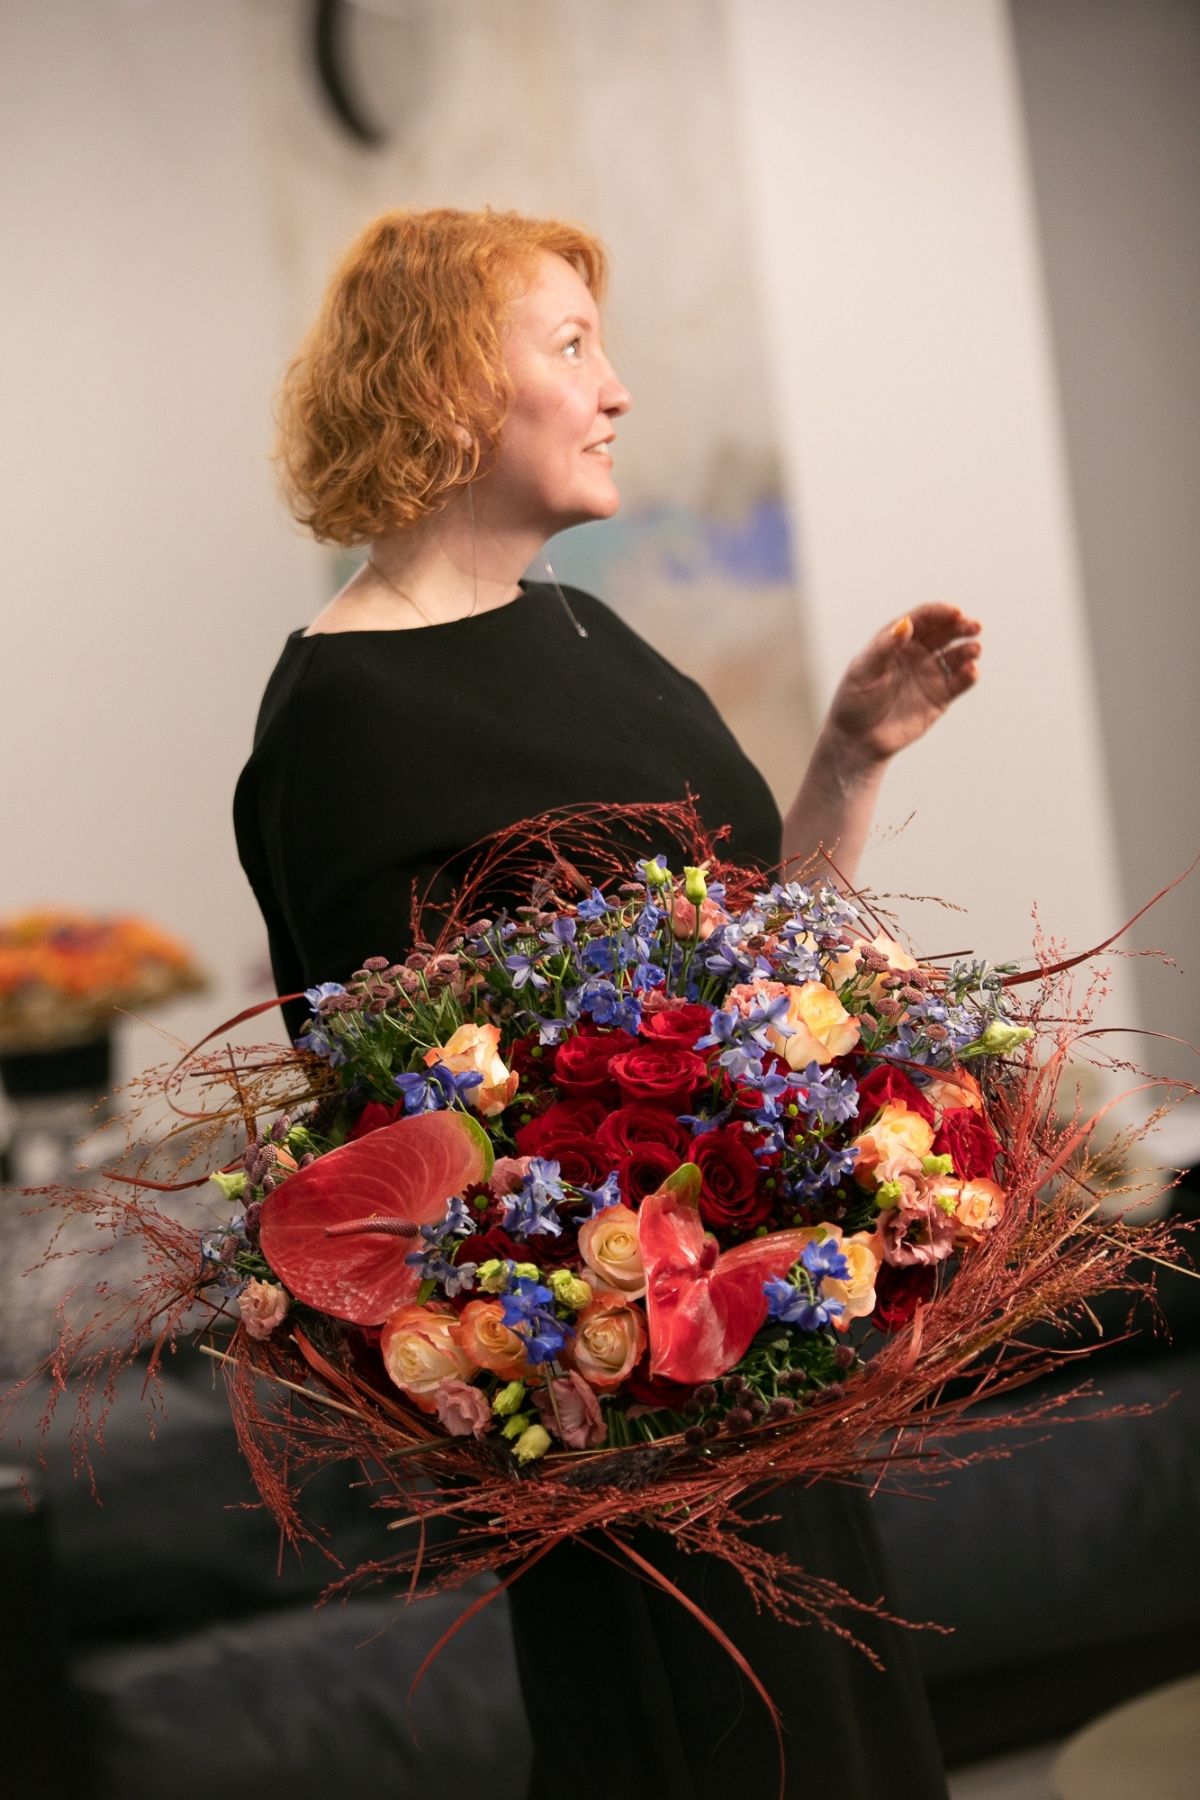 Red haired women next to flowers